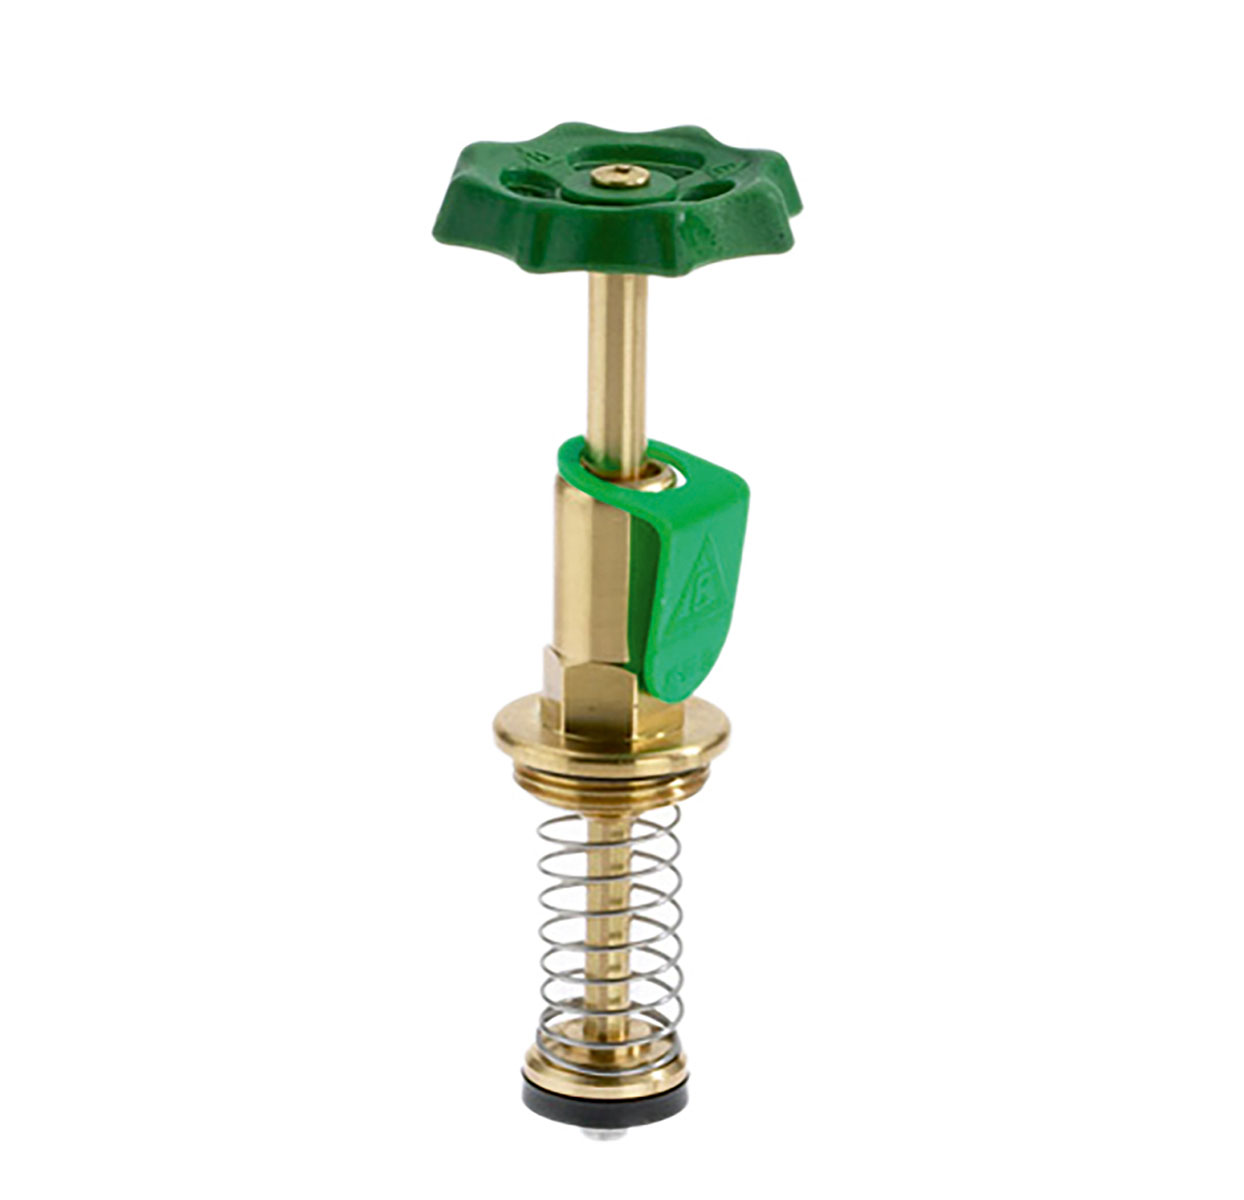 1213500 - Brass Upper-part with grease chamber for Combined Free-flow and Backflow-preventer valves, risinge Spindel